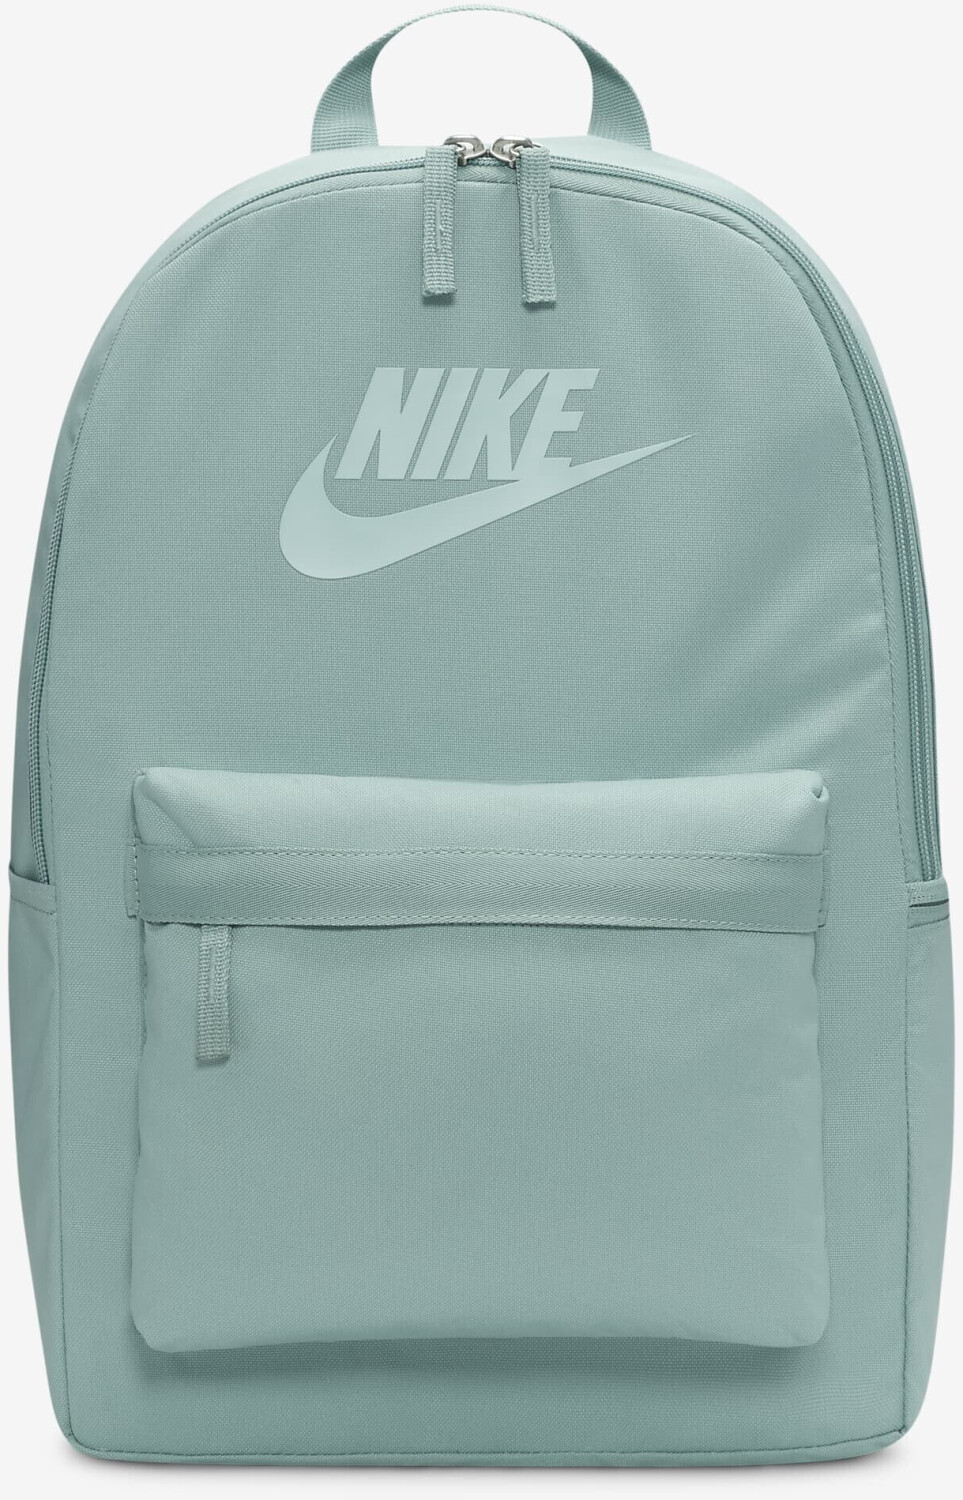 Photos - Backpack Nike Heritage Mineral/Mineral 